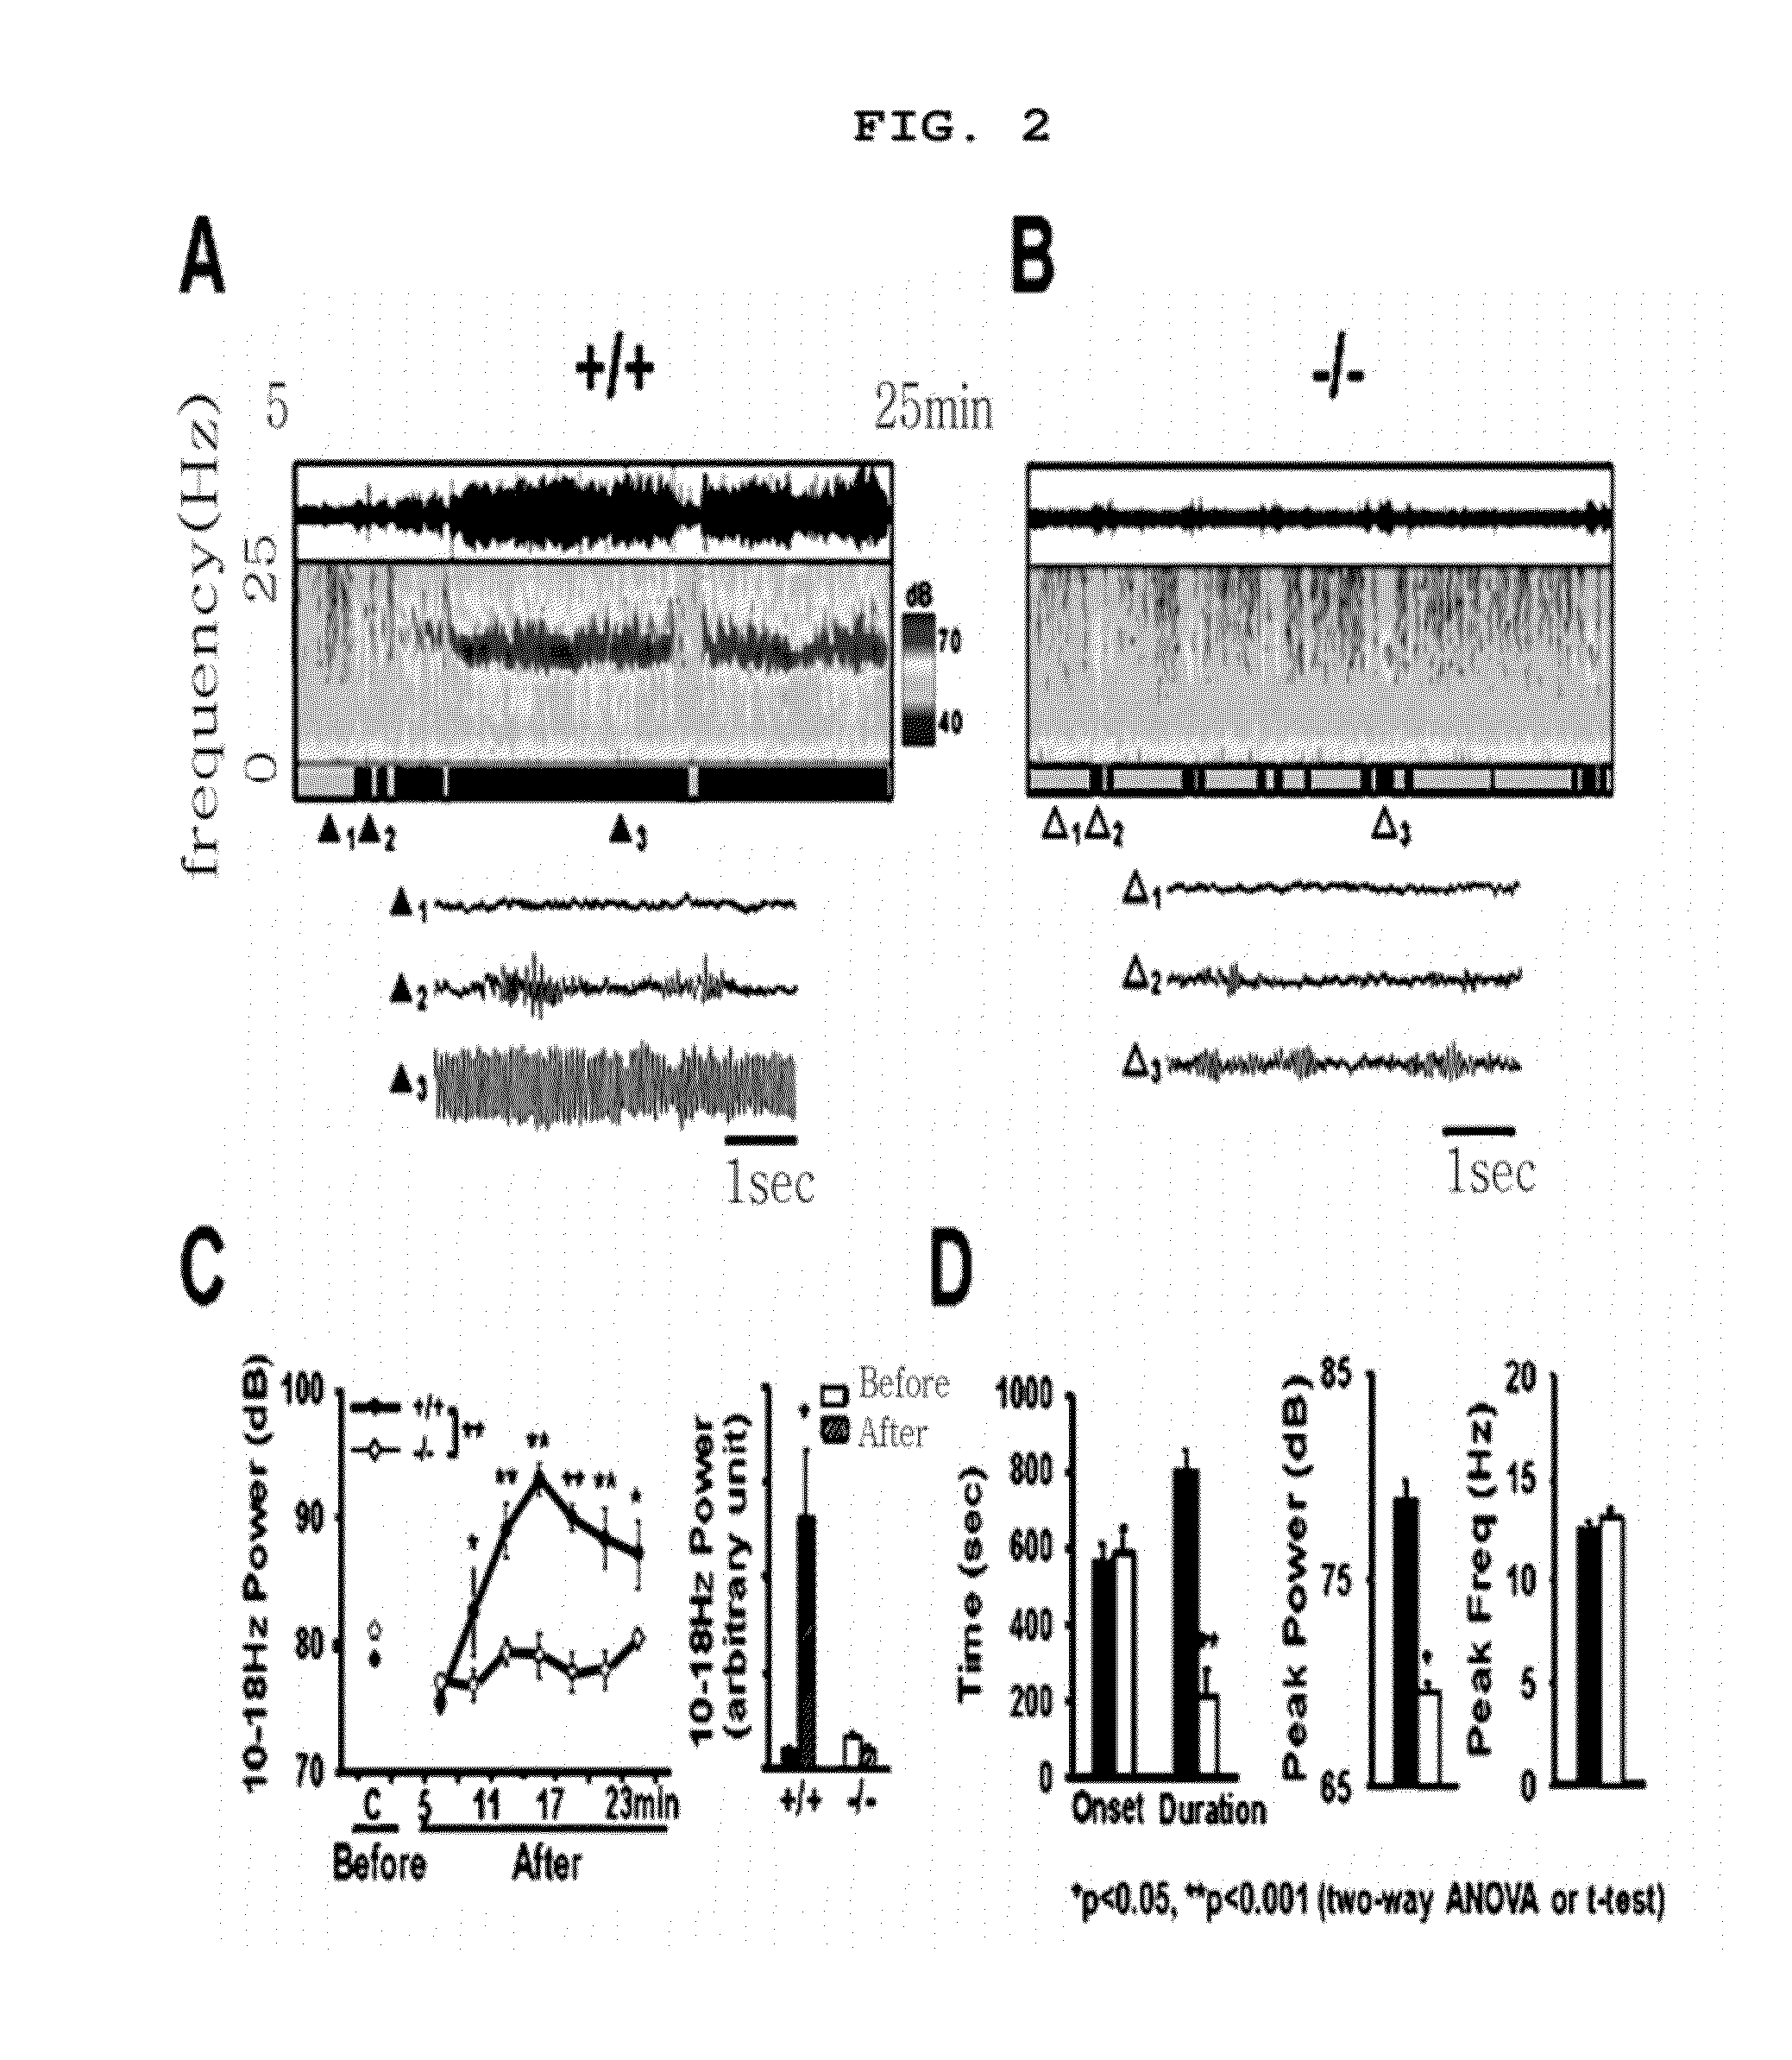 METHOD FOR THE PREVENTION AND TREATMENT OF ESSENTIAL TREMOR BY REGULATING alpha1G T-TYPE CALCIUM CHANNEL OR BY T-TYPE CALCIUM CHANNEL BLOCKERS